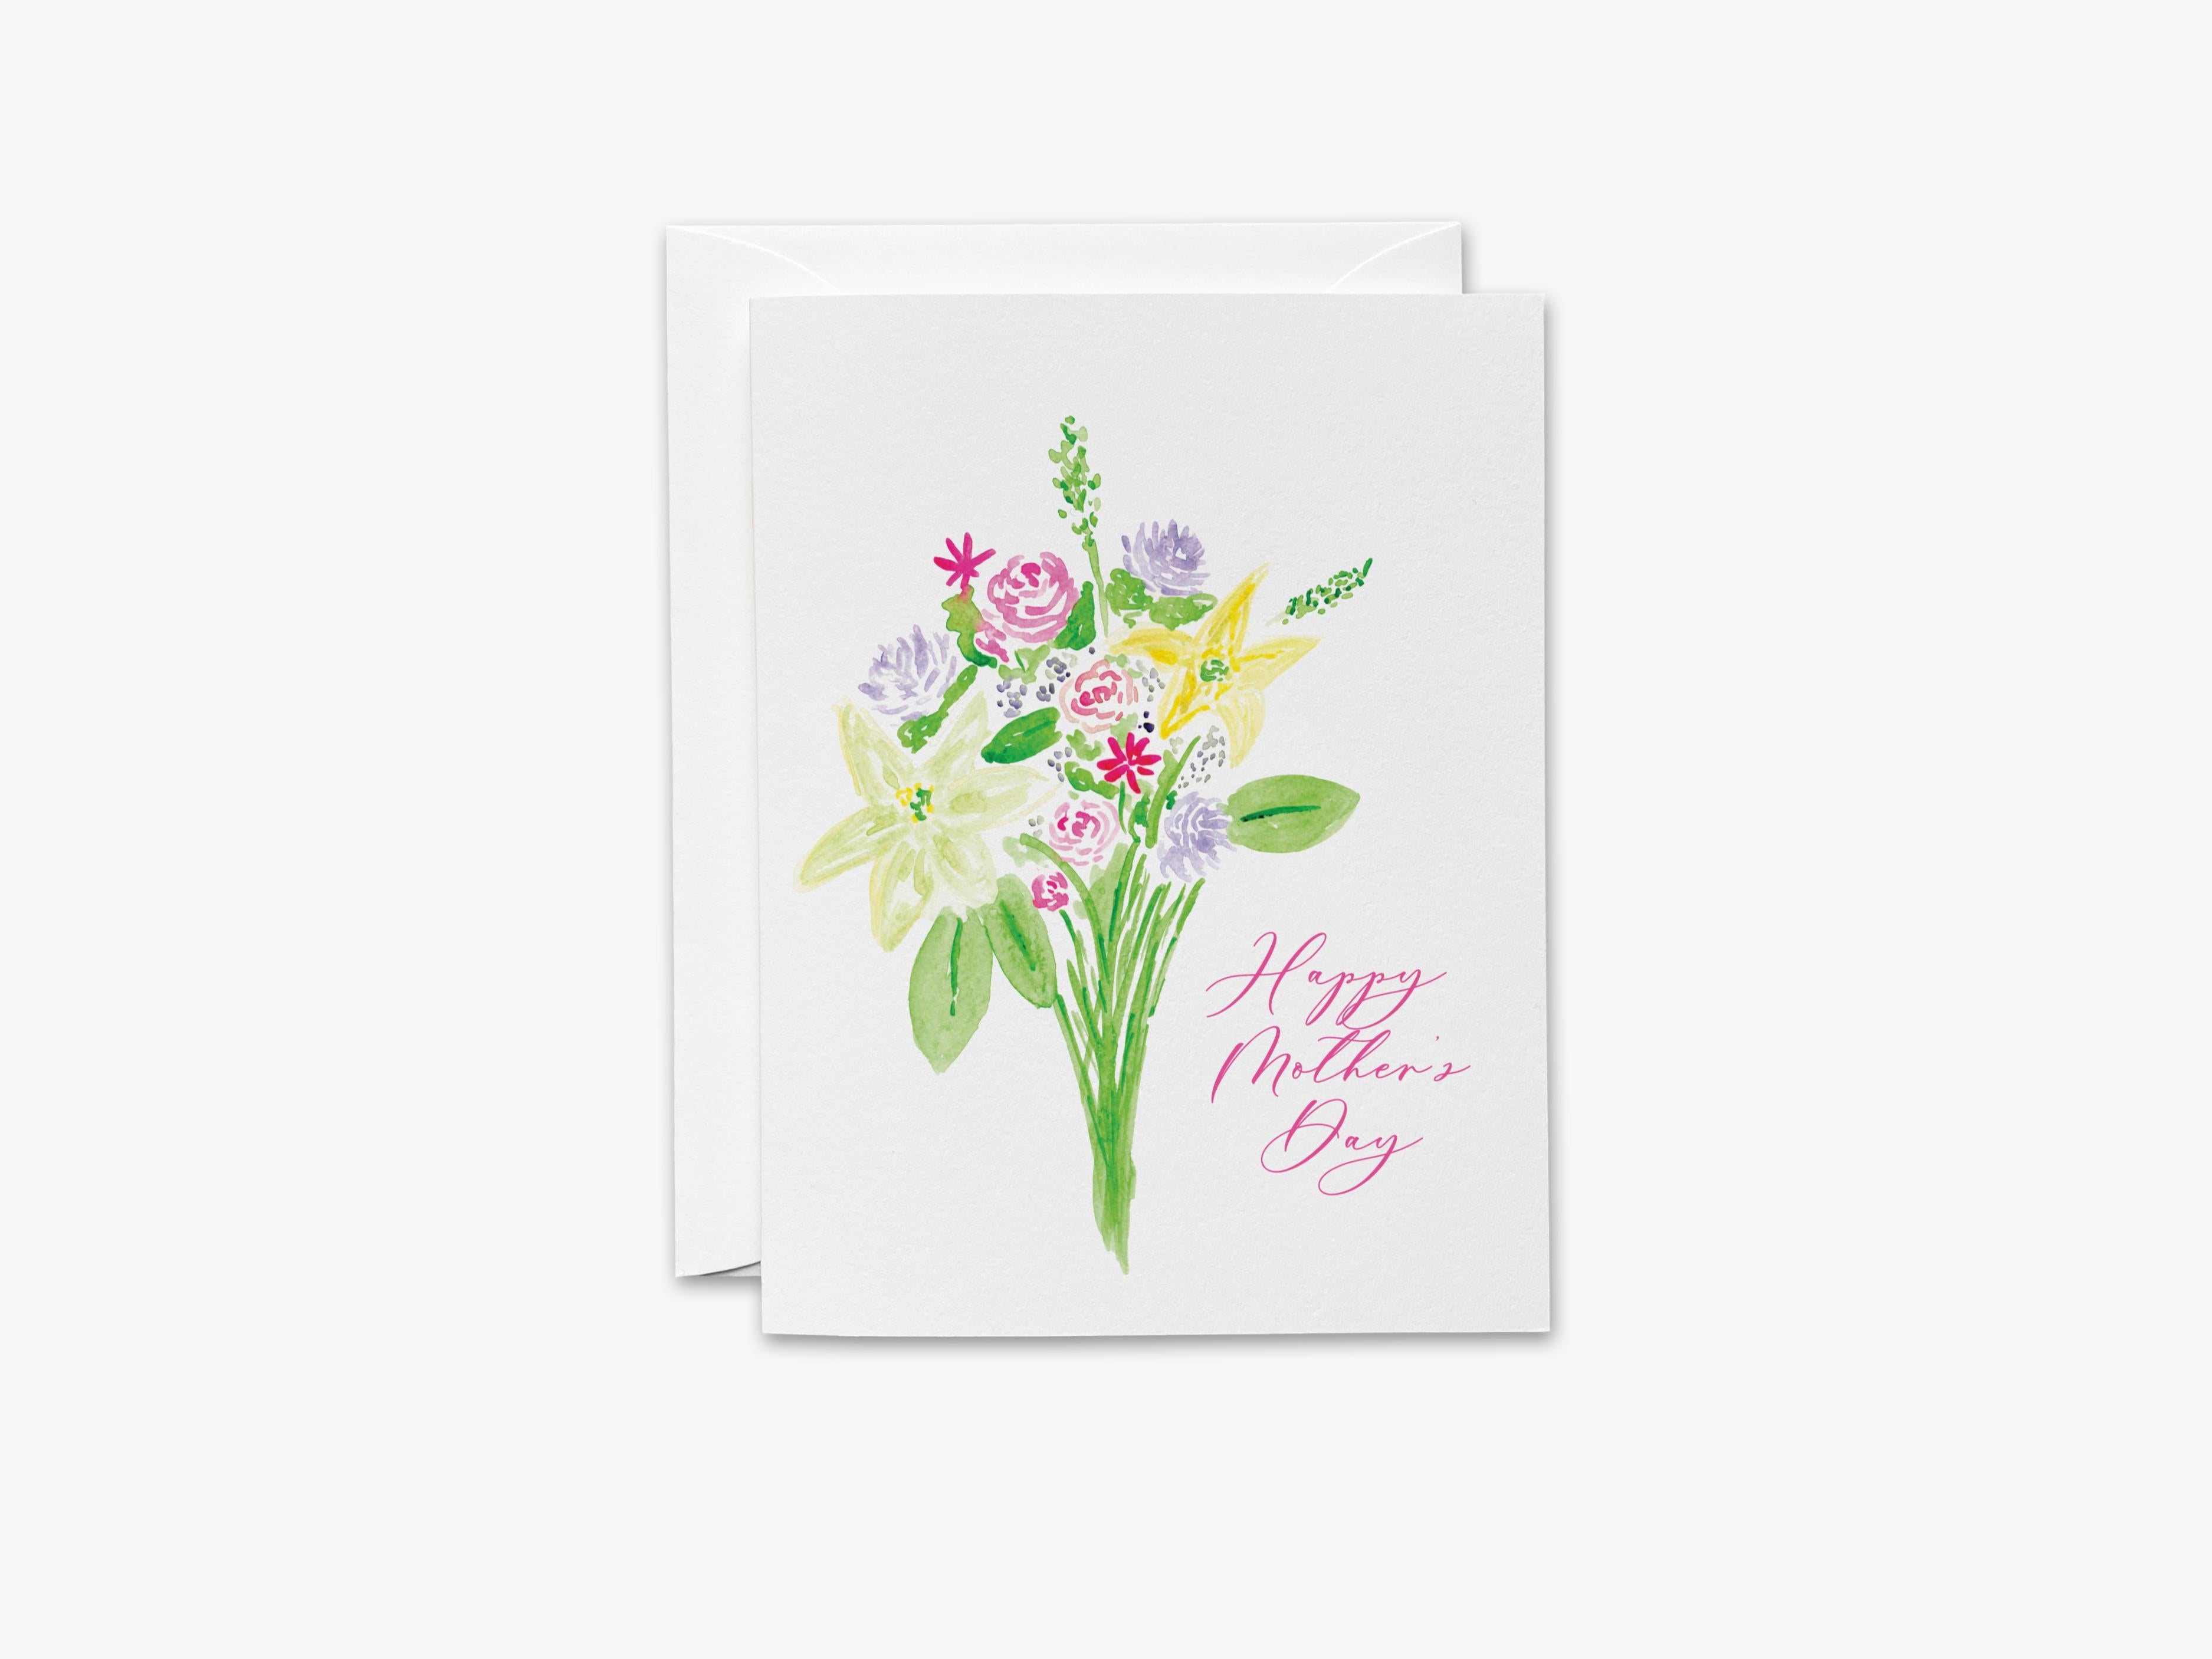 Spring Bouquet Mother's Day Greeting Card-These folded greeting cards are 4.25x5.5 and feature our hand-painted flower bouquet, printed in the USA on 100lb textured stock. They come with a White envelope and make a great Mother's Day card for the mom in your life.-The Singing Little Bird